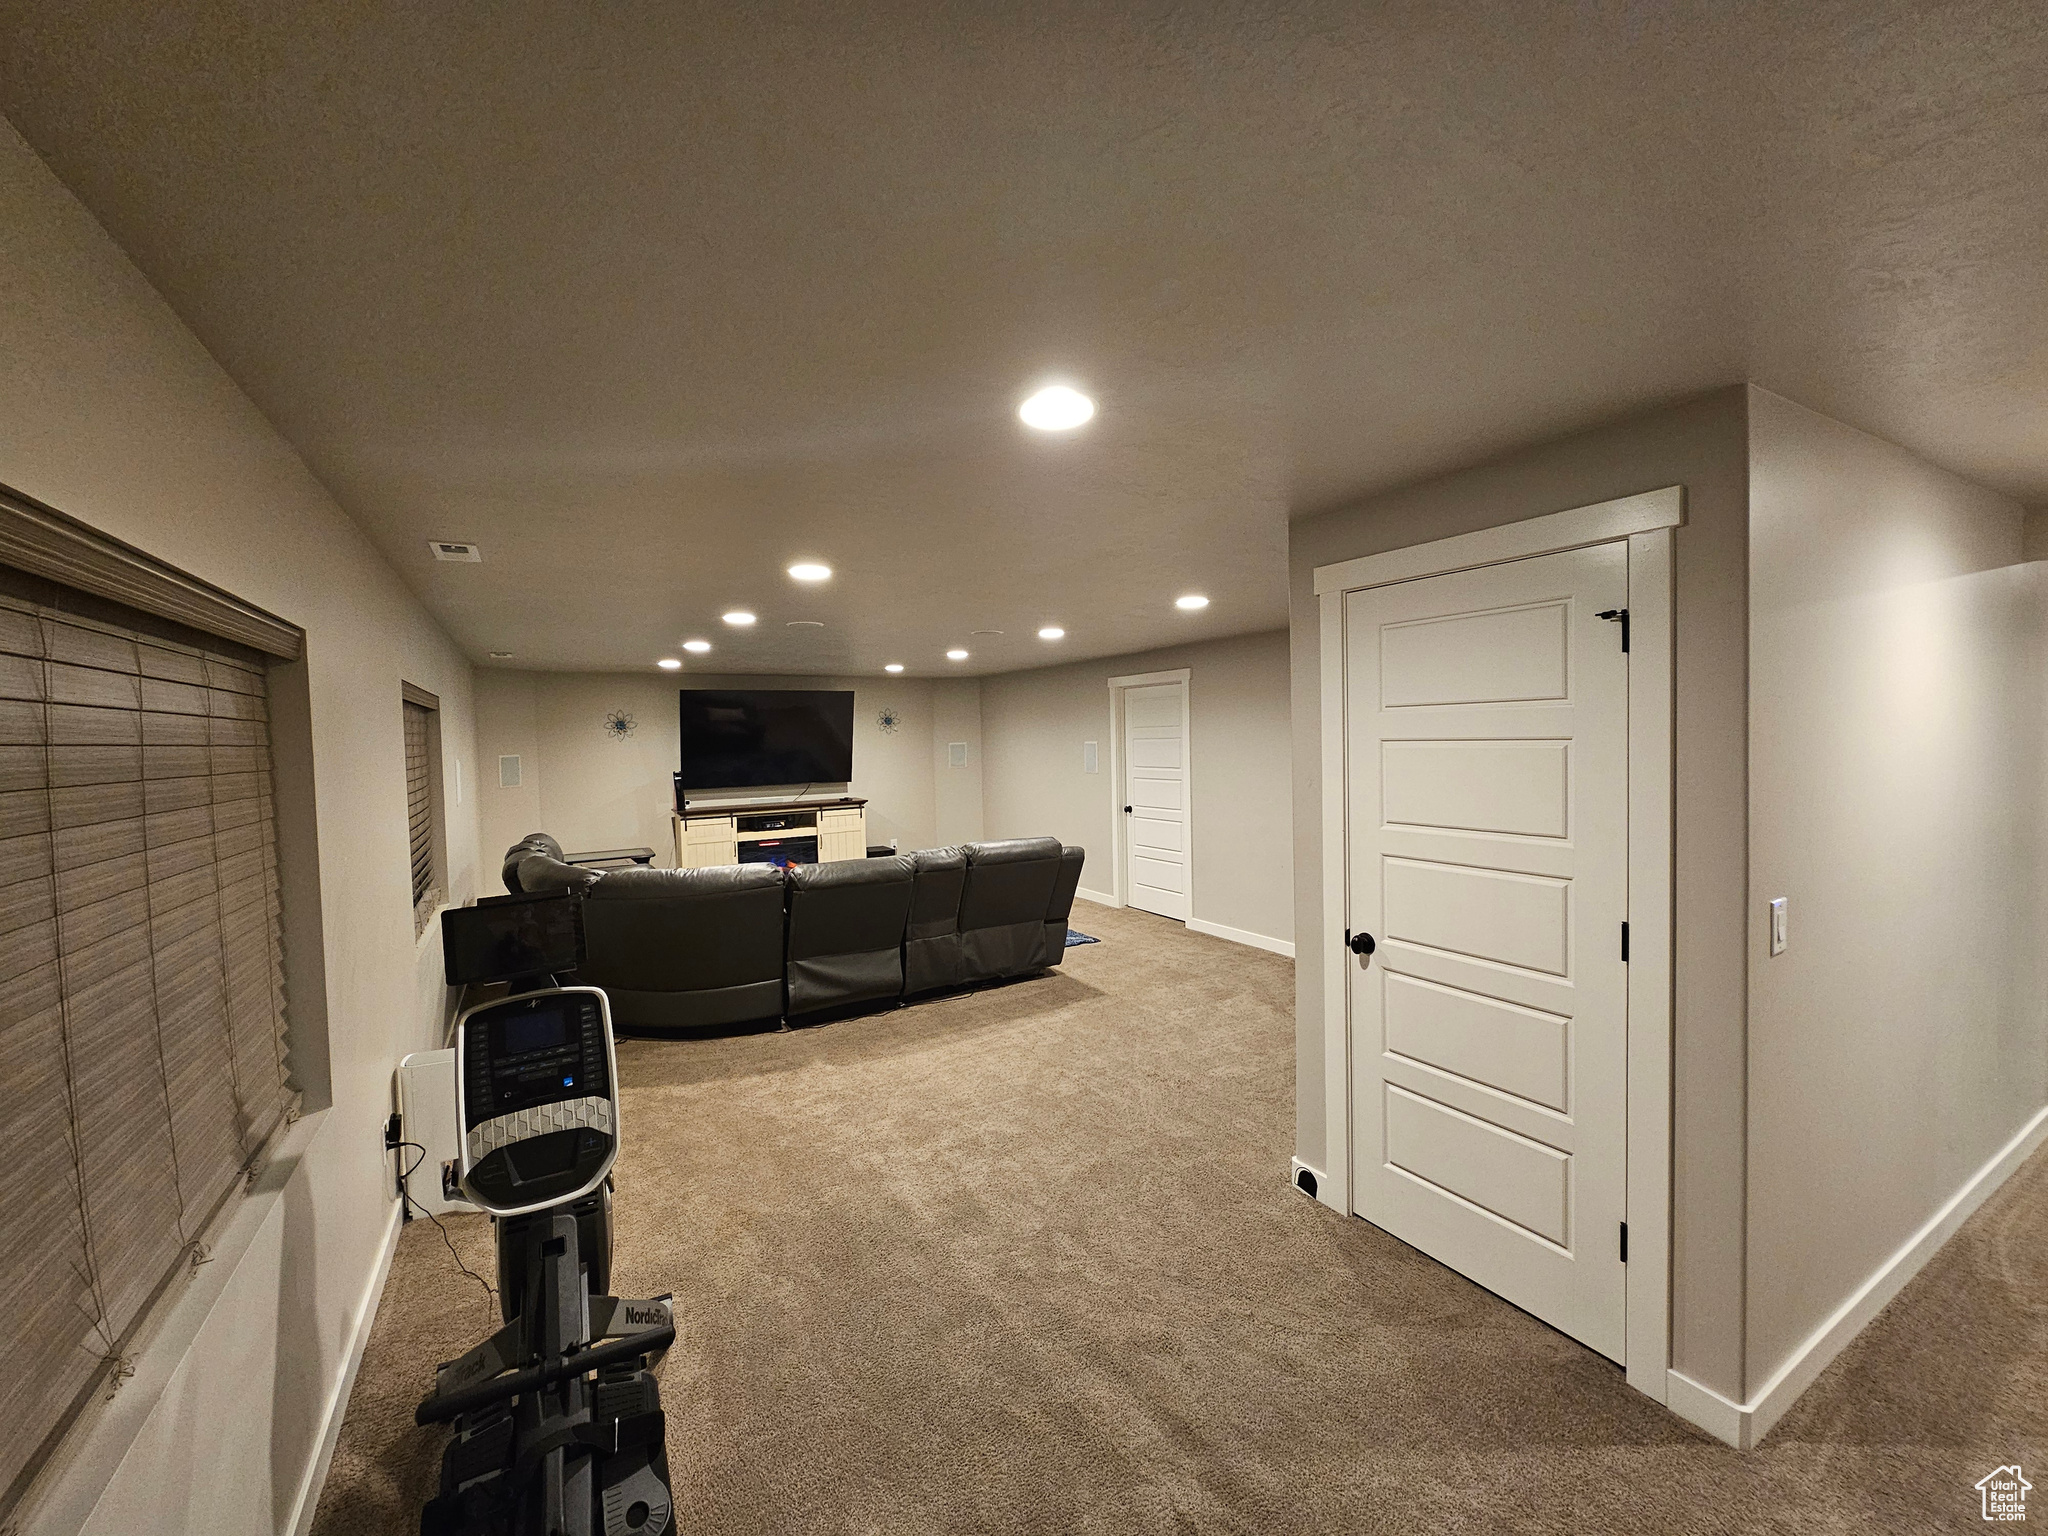 Entrance to family room at the bottom of the stairs